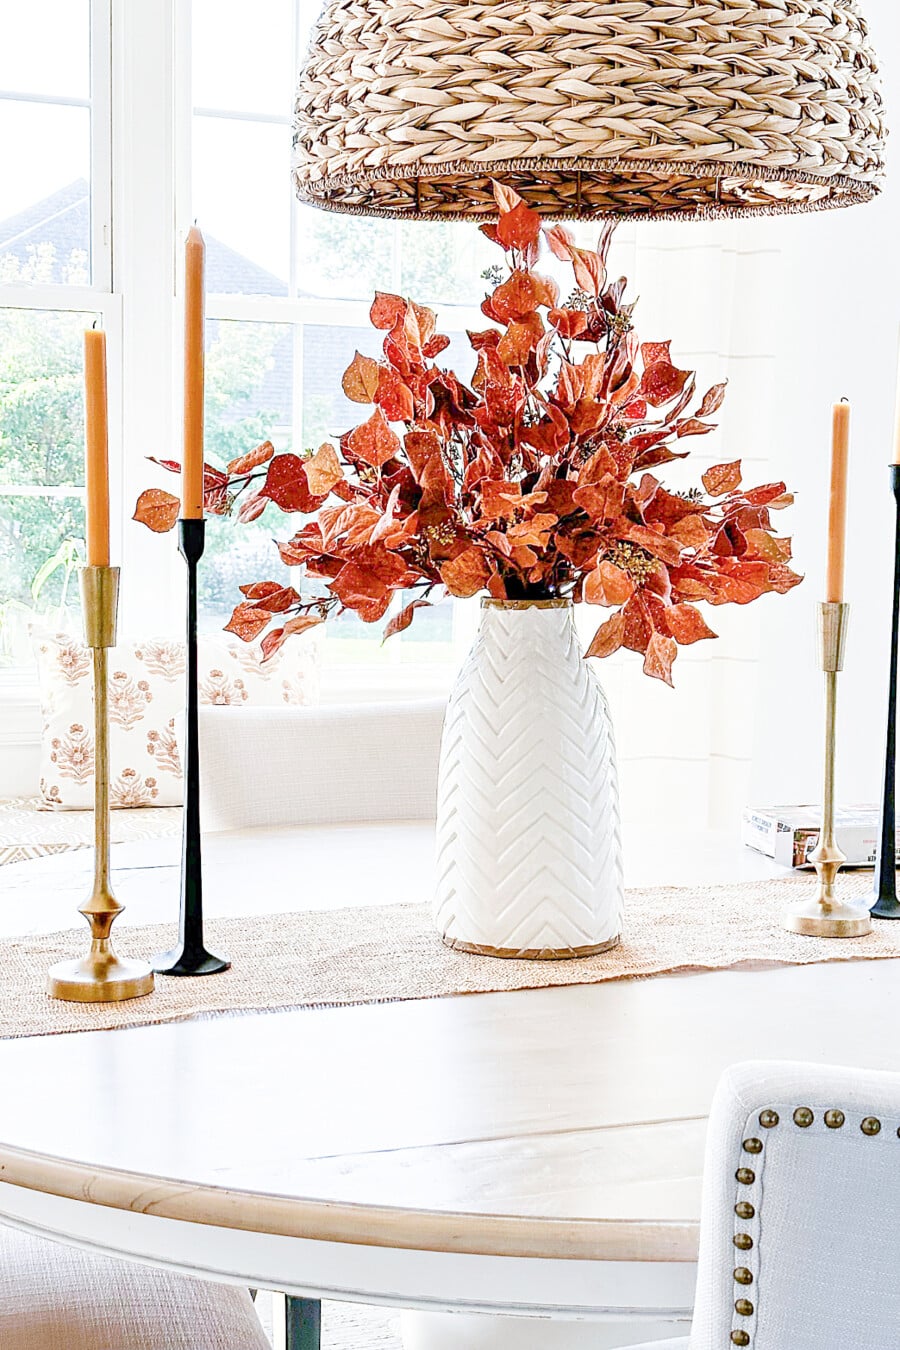 10 Beautiful Ideas For Fall Centerpieces